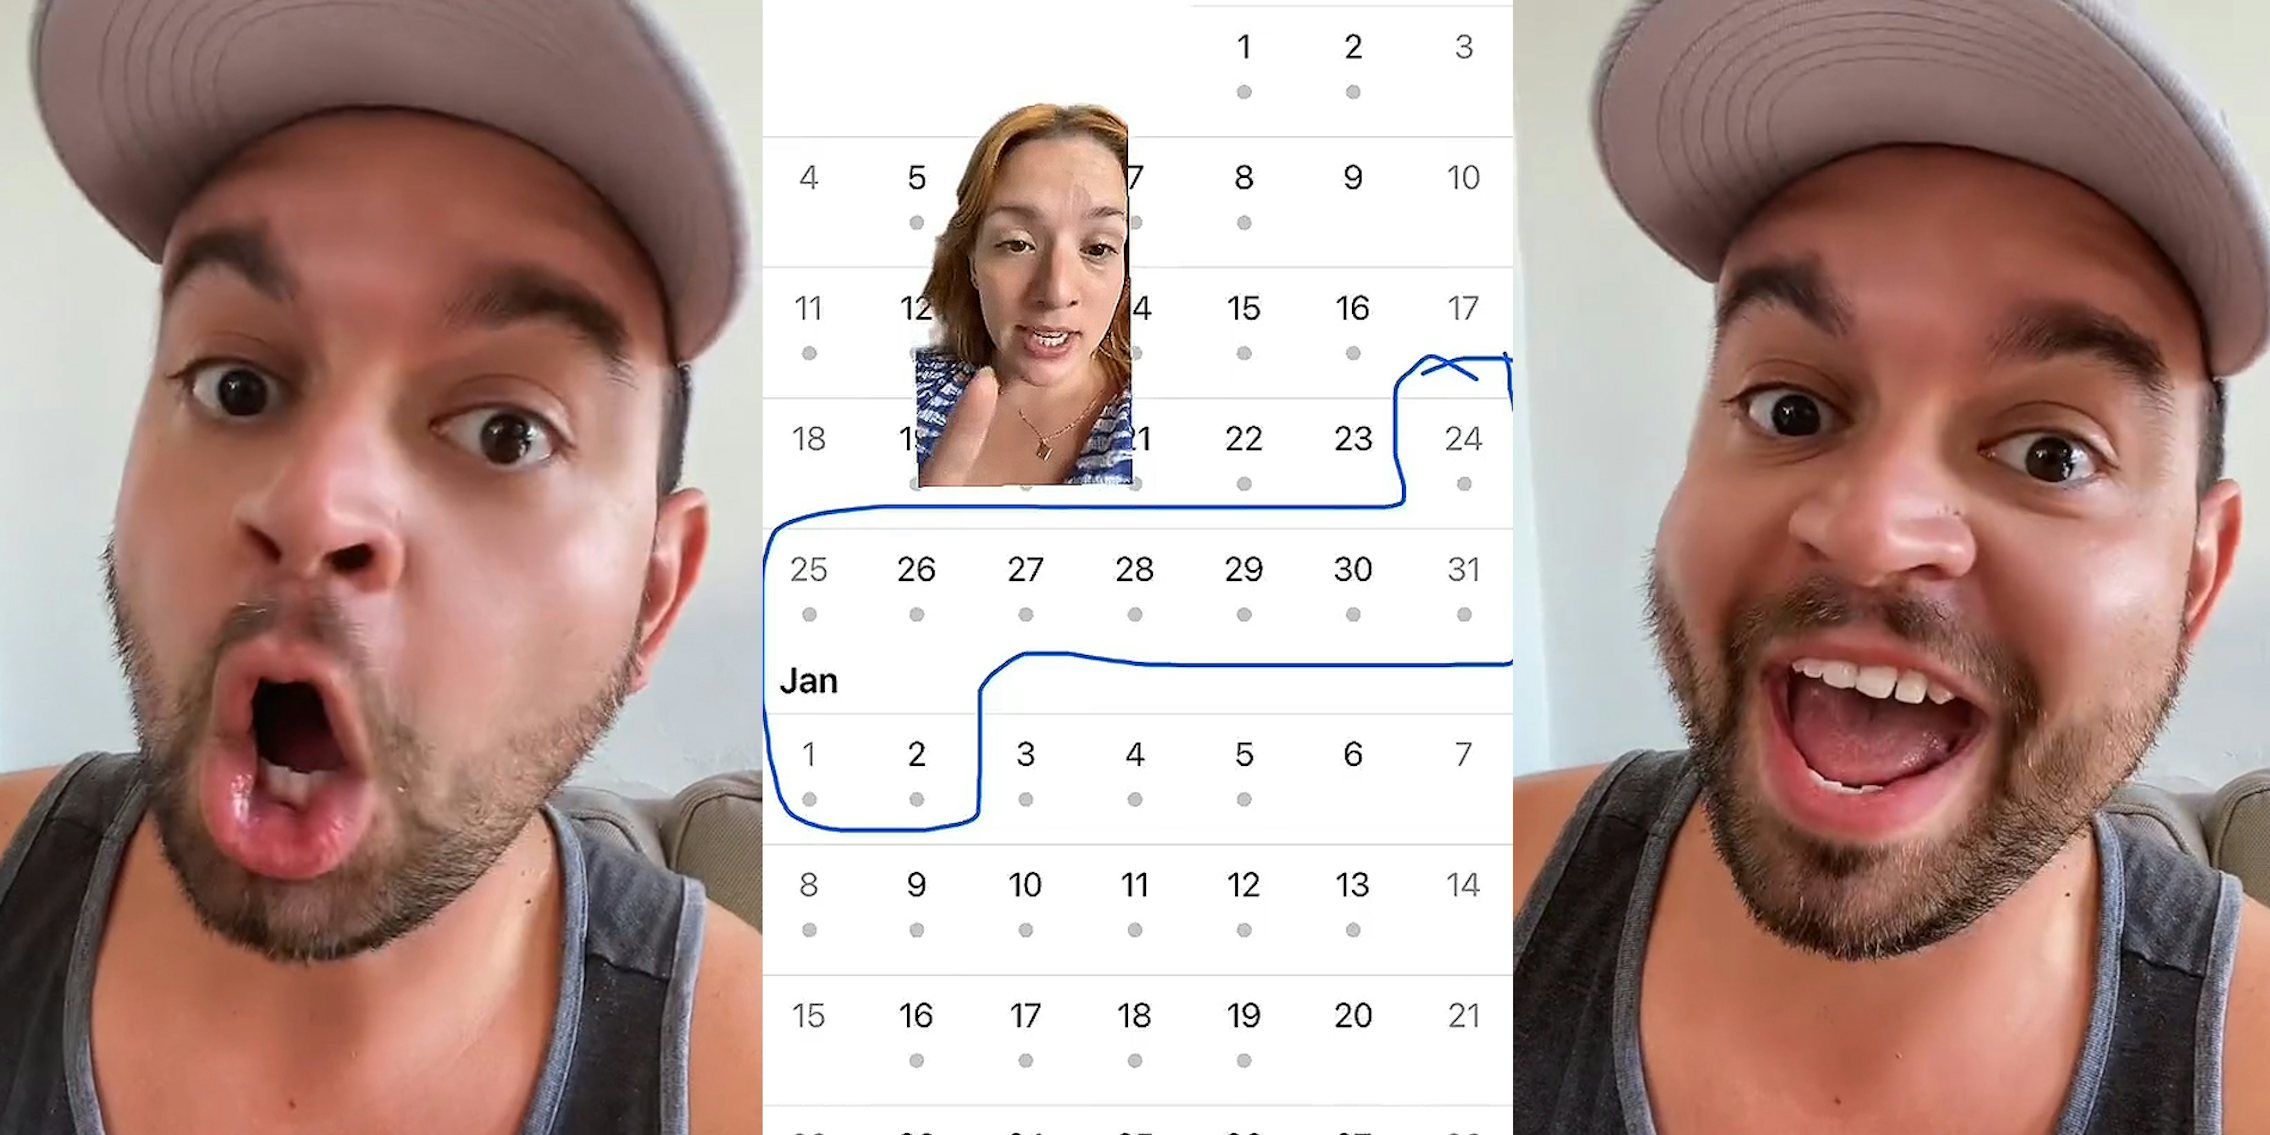 Man speaking saying 'NO' on gray background (l) woman greenscreen TikTok over December-January calendar with dates December 24th- January 2nd circled in blue (c) Man speaking on gray background (r)